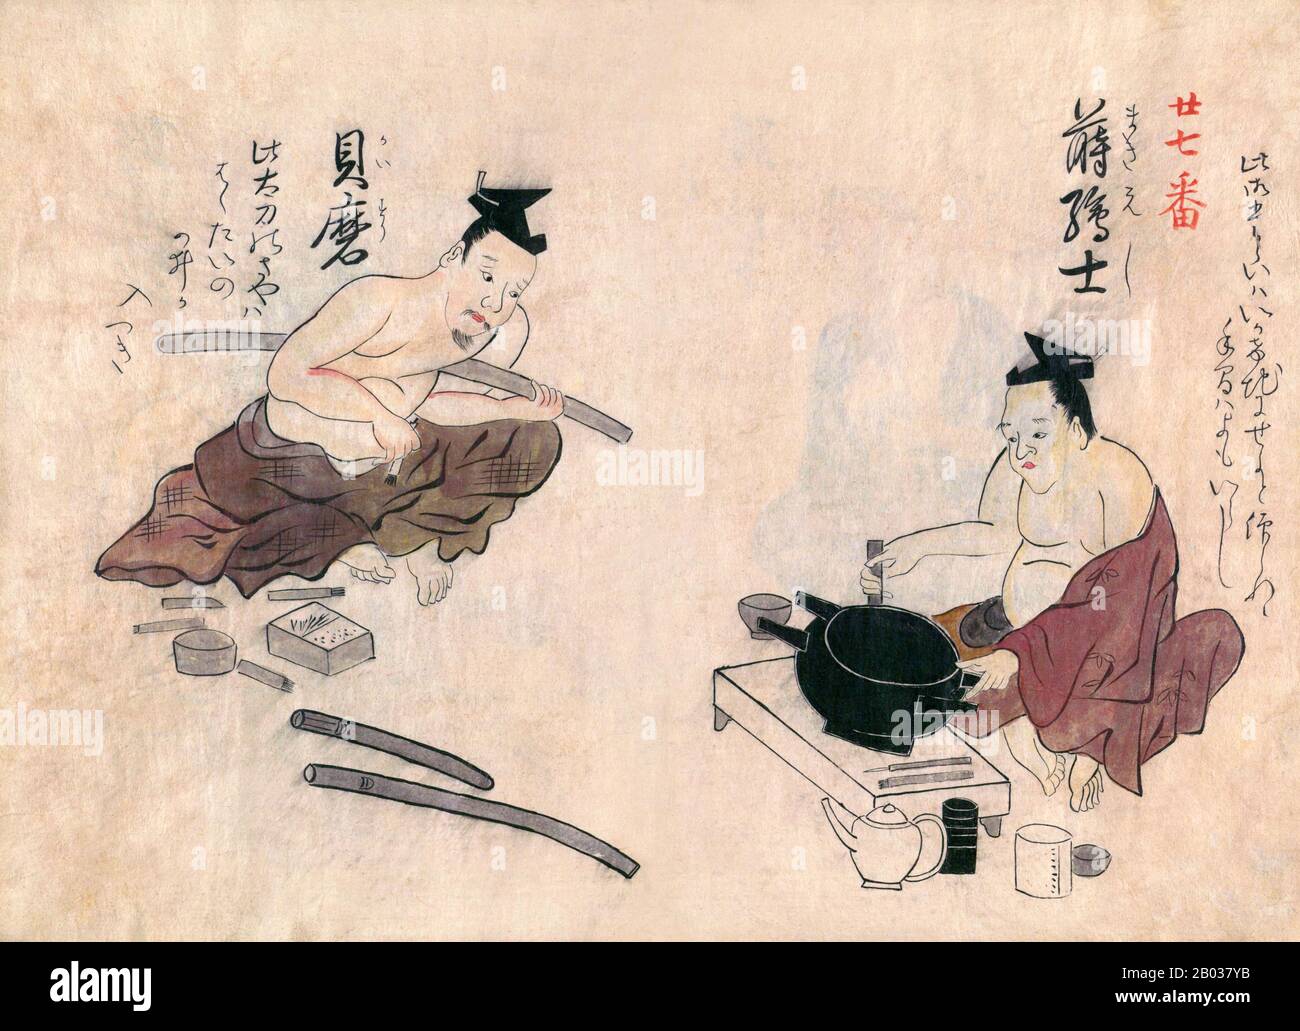 Hand-coloured illustration from a Japanese miscellany on traditional trades, crafts and customs in mid-18th century Japan, dated Meiwa Era (1764-1772) Year 6 (c. 1770 CE). Stock Photo